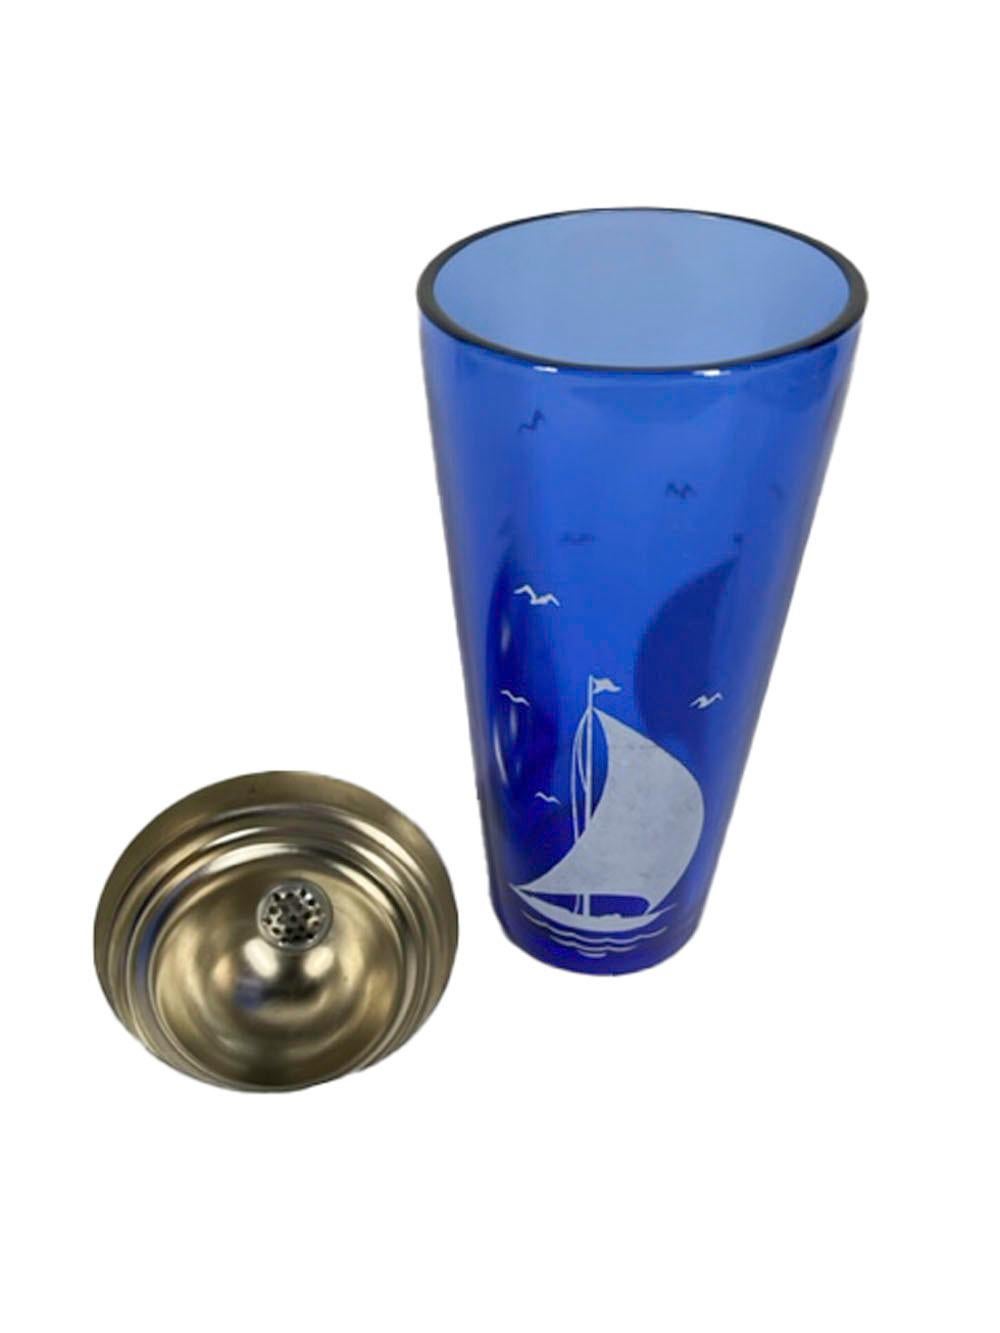 20th Century Art Deco, Hazel-Atlas Cocktail Shaker with White Sailboat on Cobalt Glass For Sale